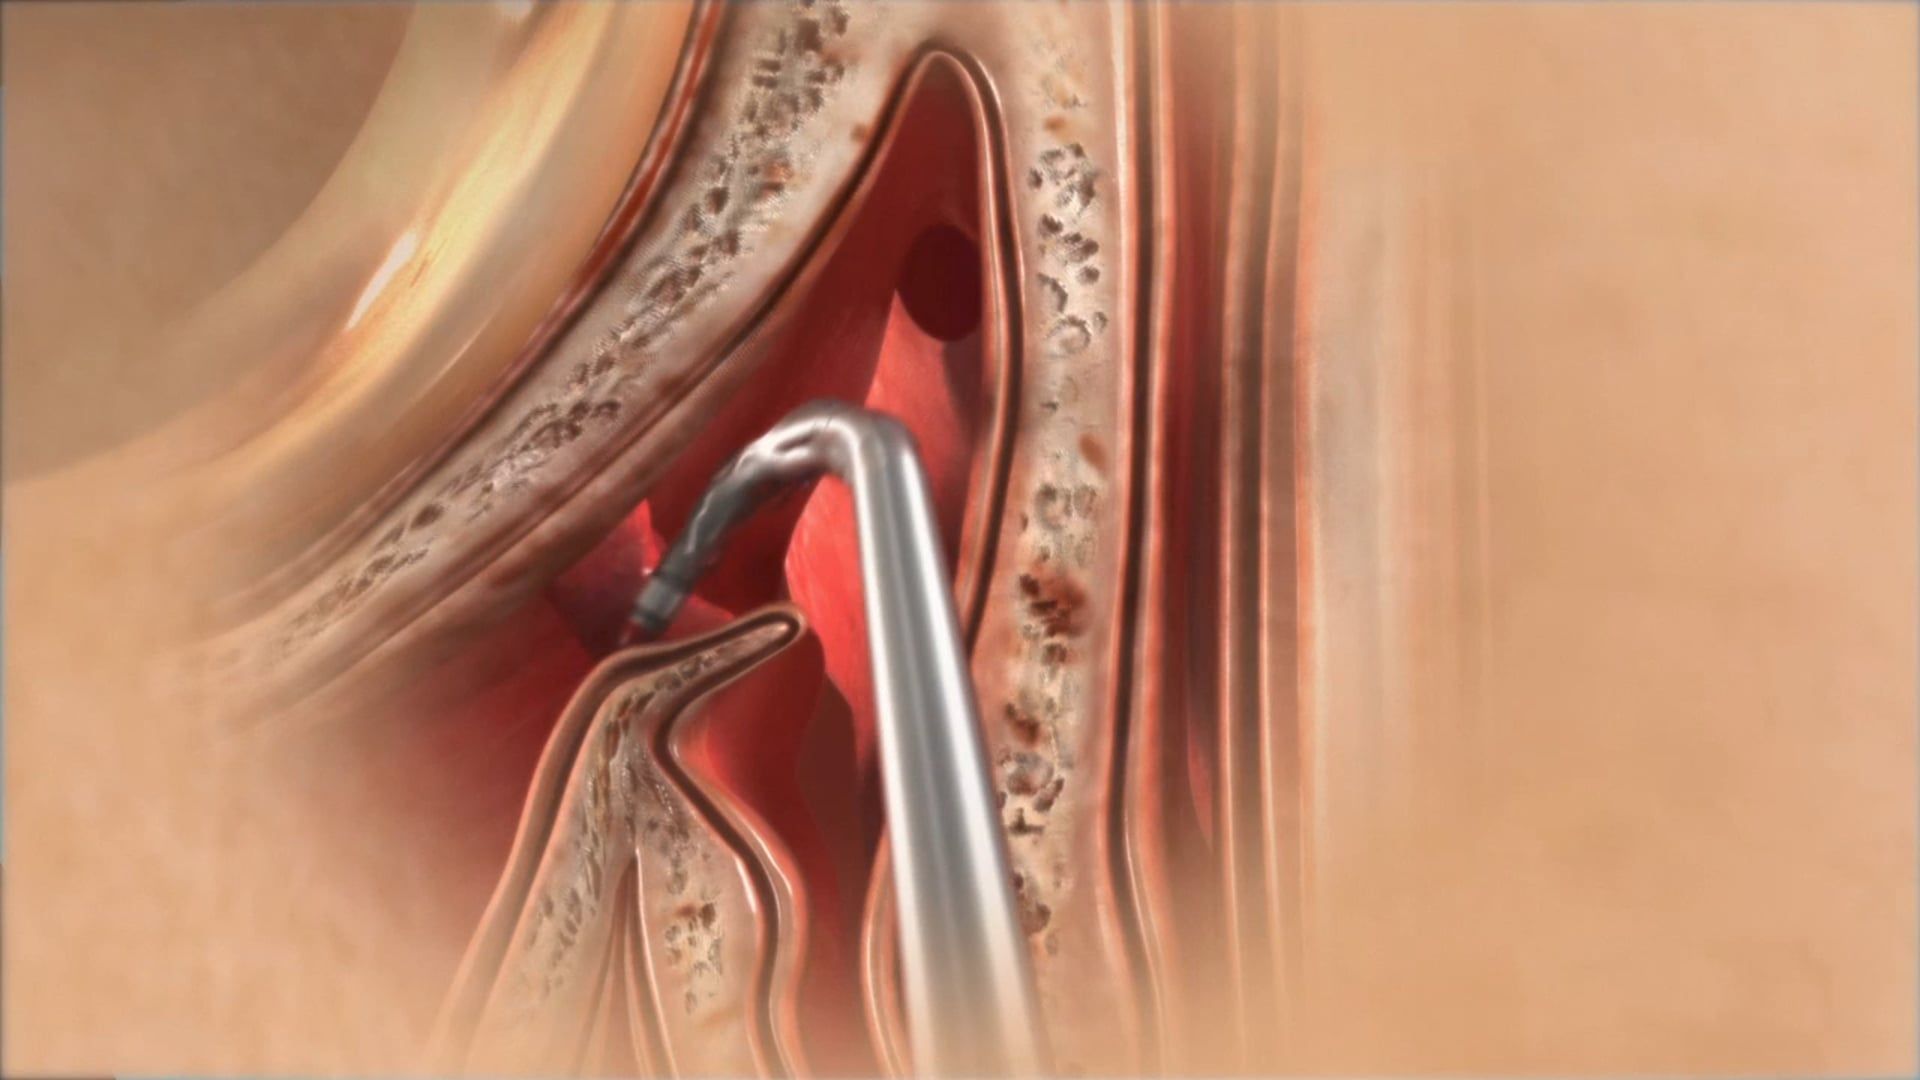 Medtronic: NuVent Sinus Dilation System